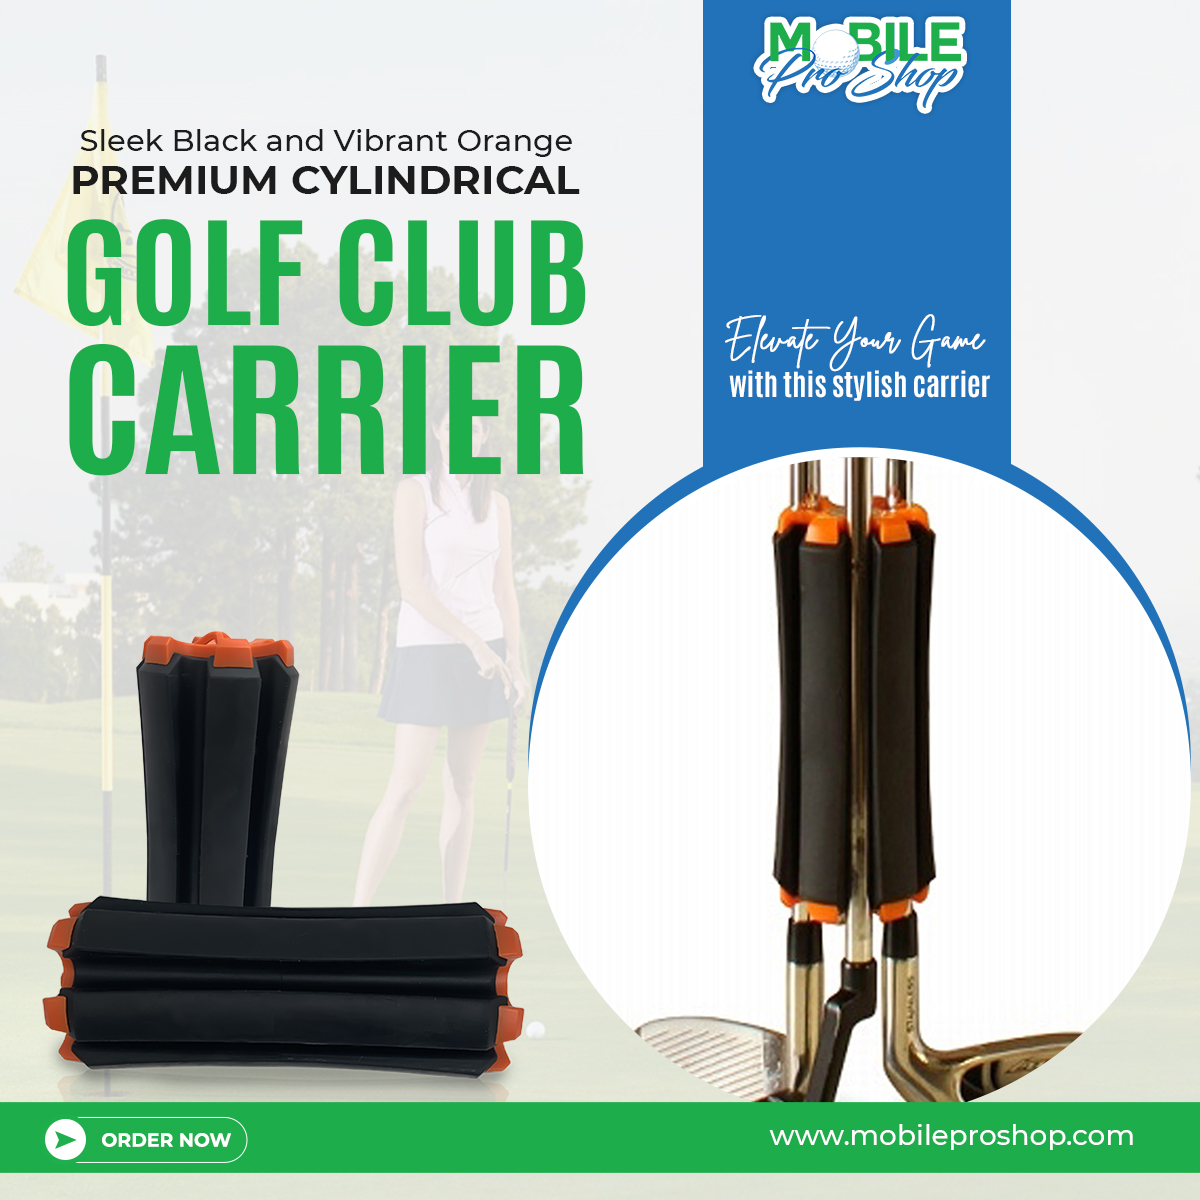 Sleek Black and Vibrant Orange Premium Cylindrical Golf Club Carrier for Unmatched Excellence on the Green!
MobileProShop #GolfingExcellence #GolfClubCarrier #SwingWithStyle #GolfInPanache #PremiumGolfGear #ProtectiveAndStylish #ElevateYourGame #CompactConvenience #SleekDesign